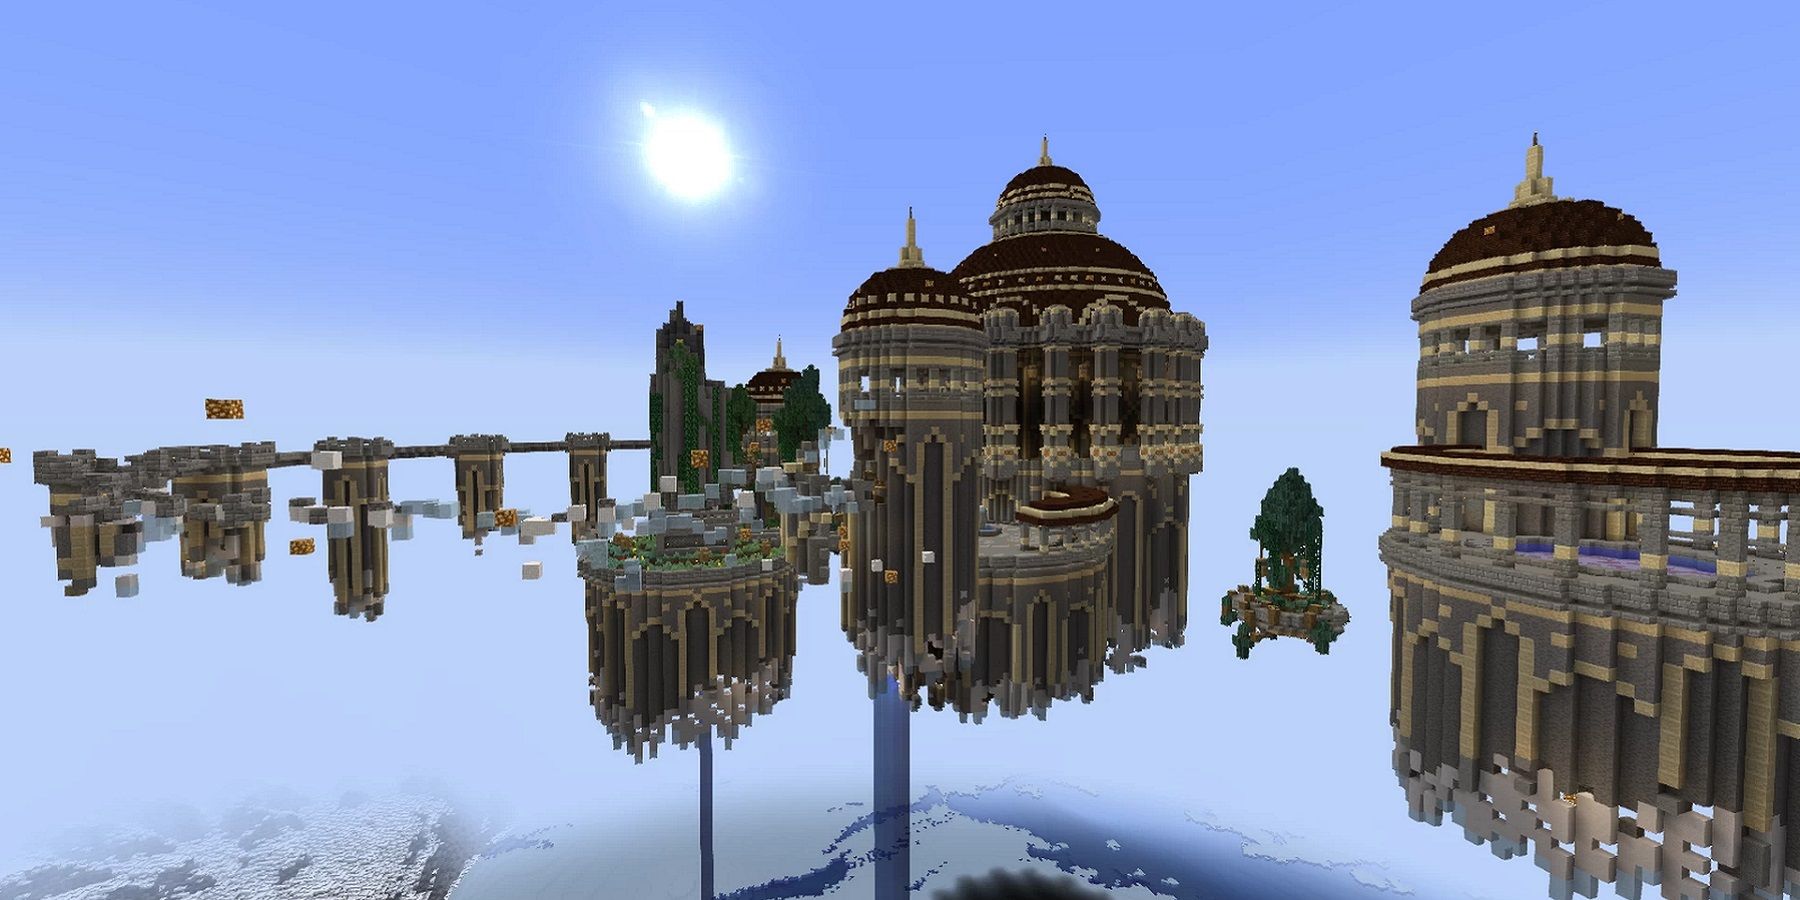 Image from Minecraft showing the world of Elden Ring in the blocky game.